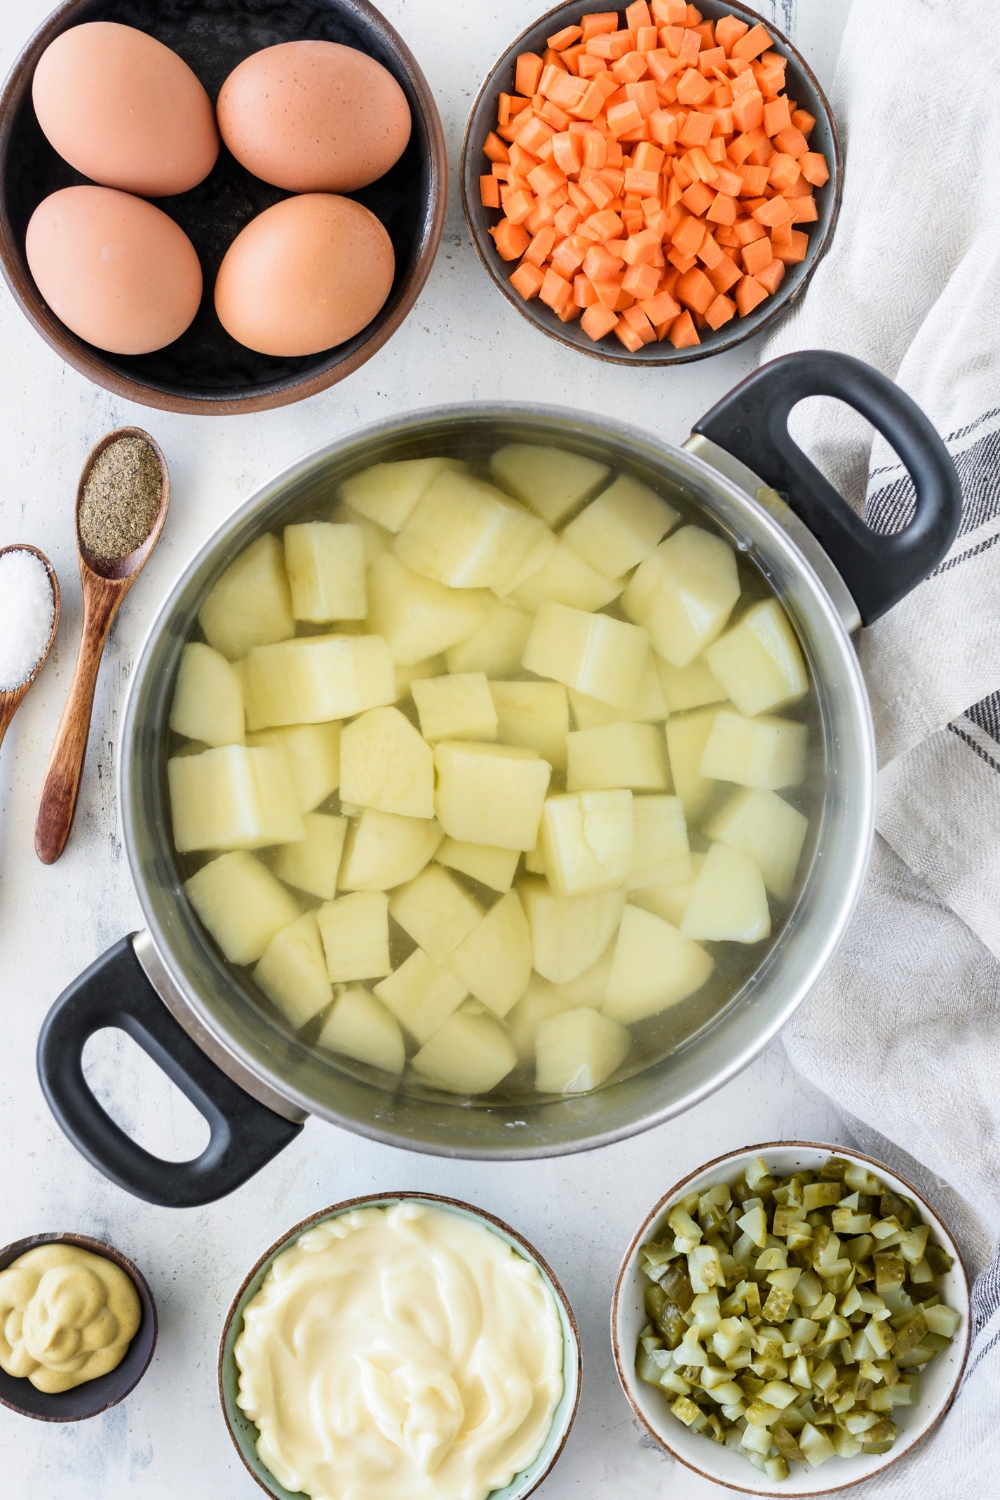 A pot filled with diced and peeled potatoes in water. The pot is surrounded by an assortment of ingredients.